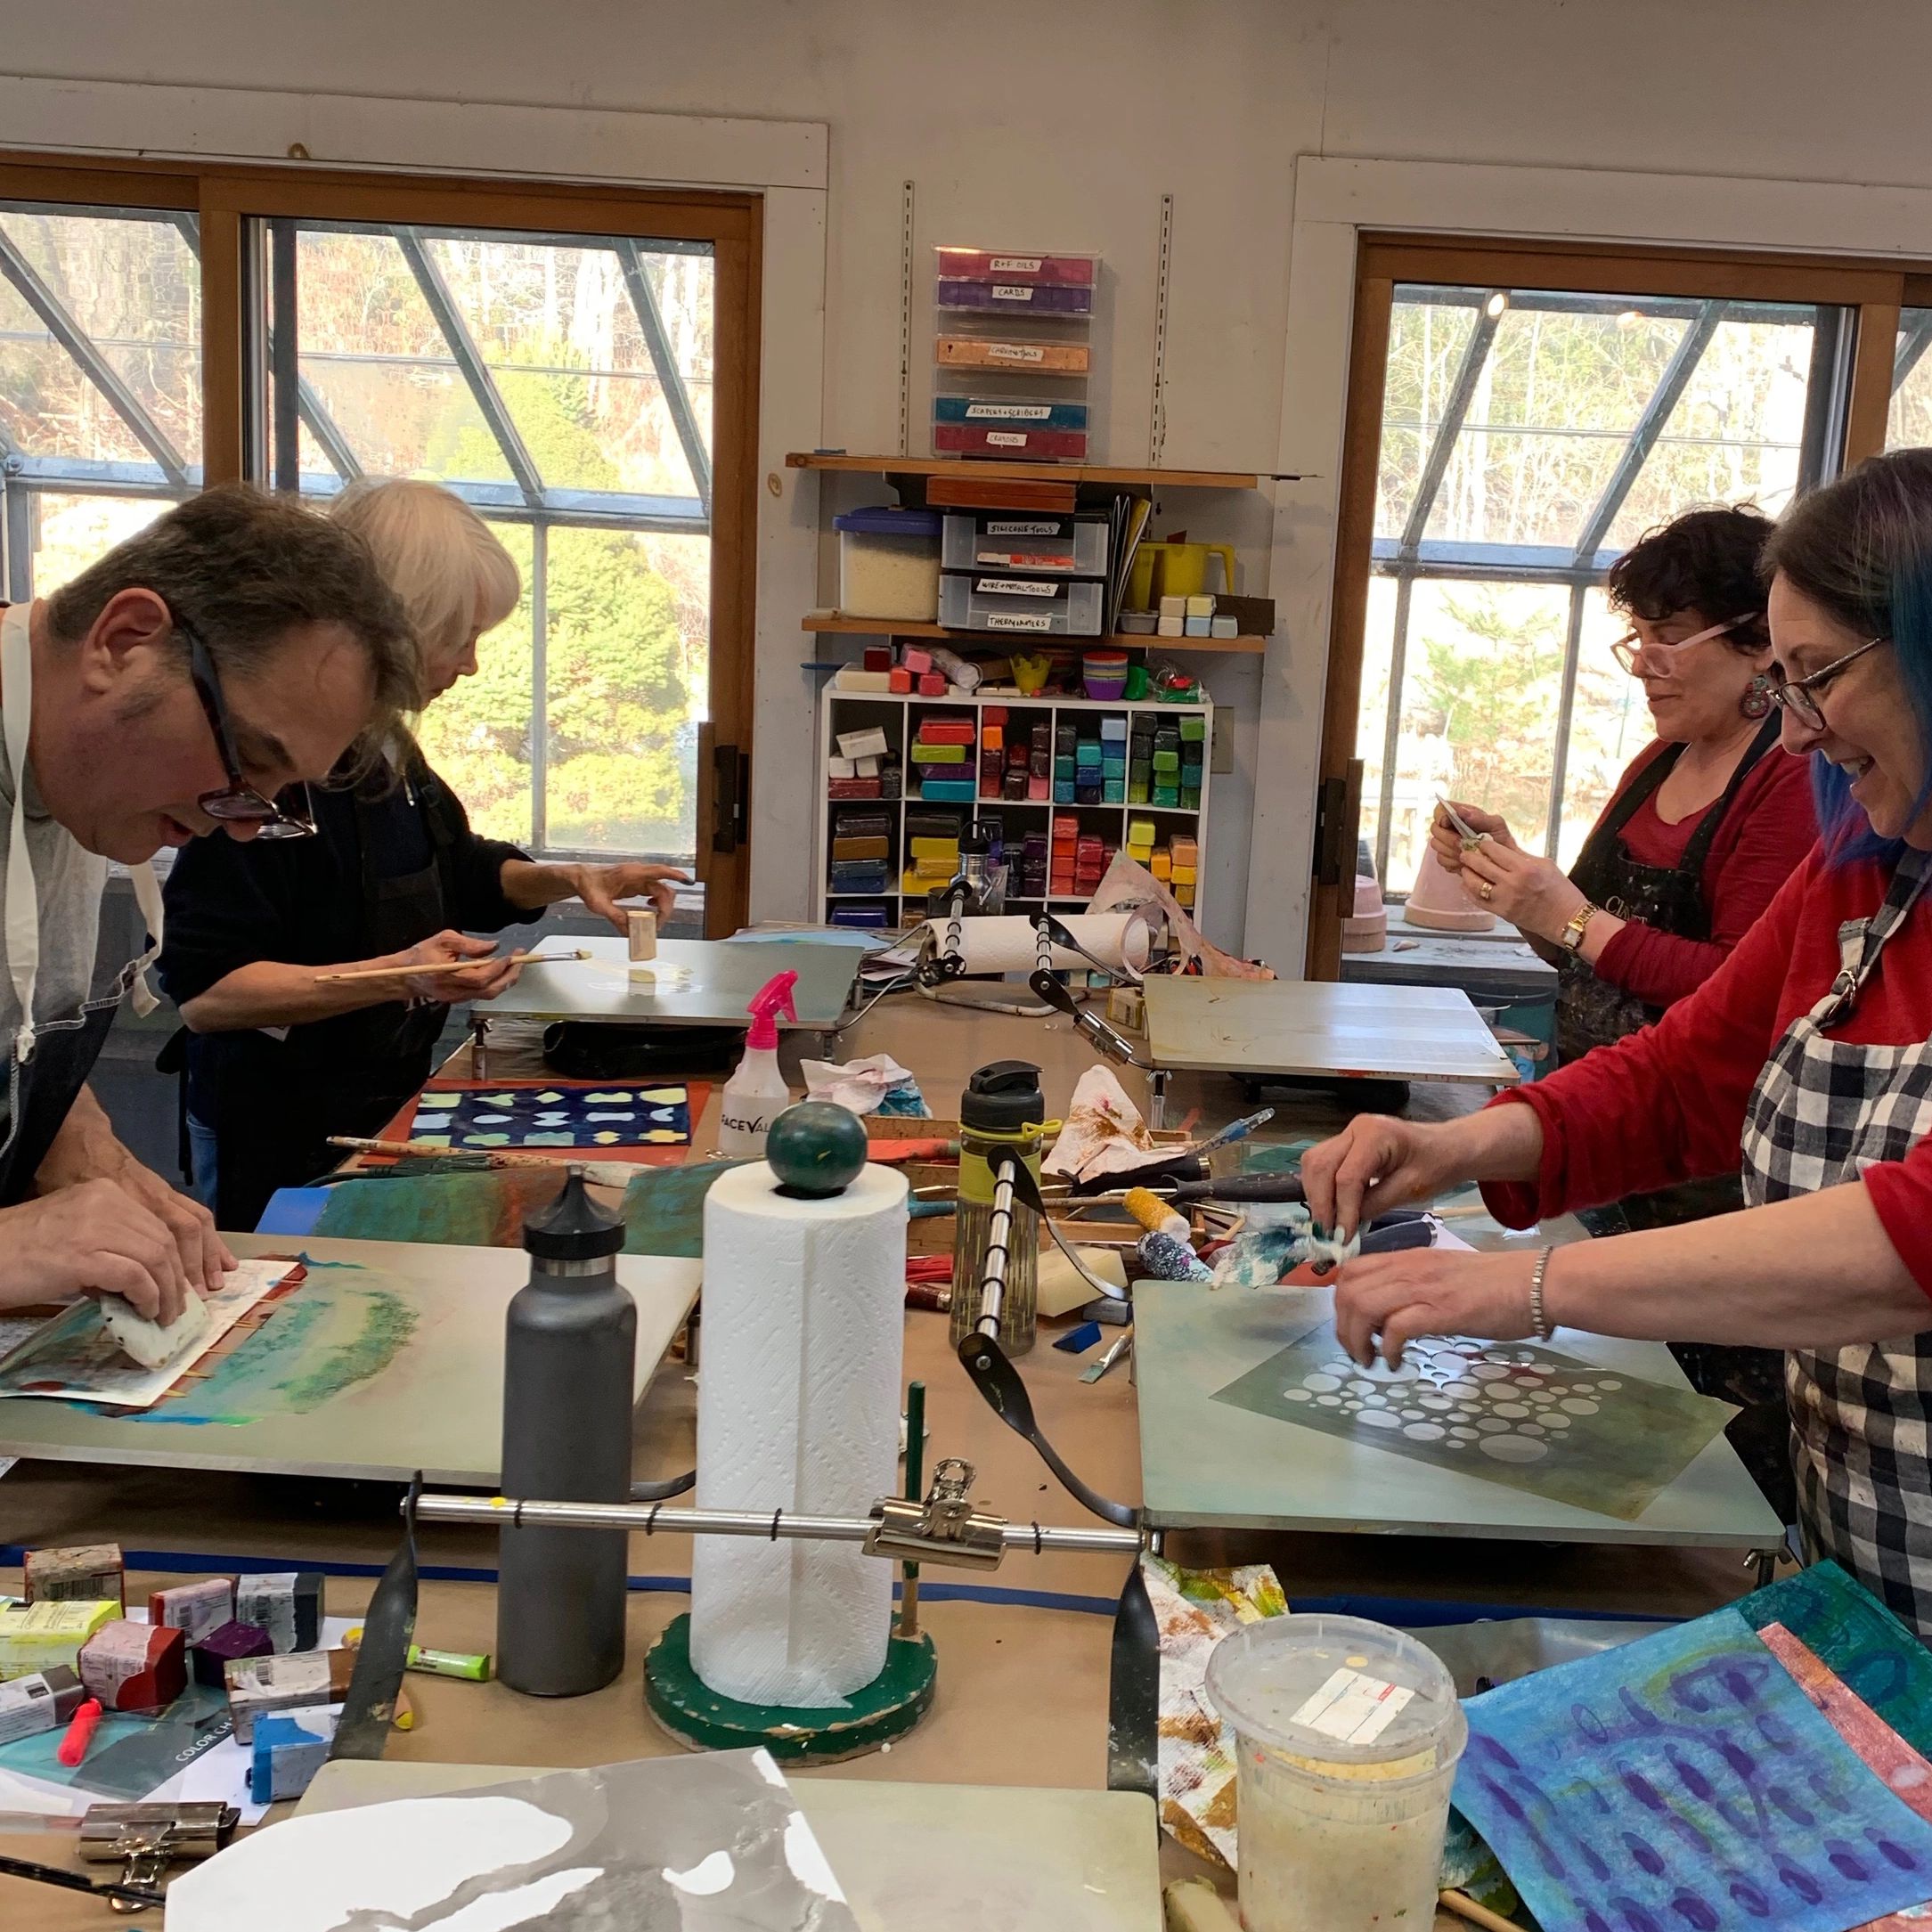 I teach in my fully equipped Weston, CT studio and Demo R&F Encaustic Paint and Pigment Sticks. FUN!